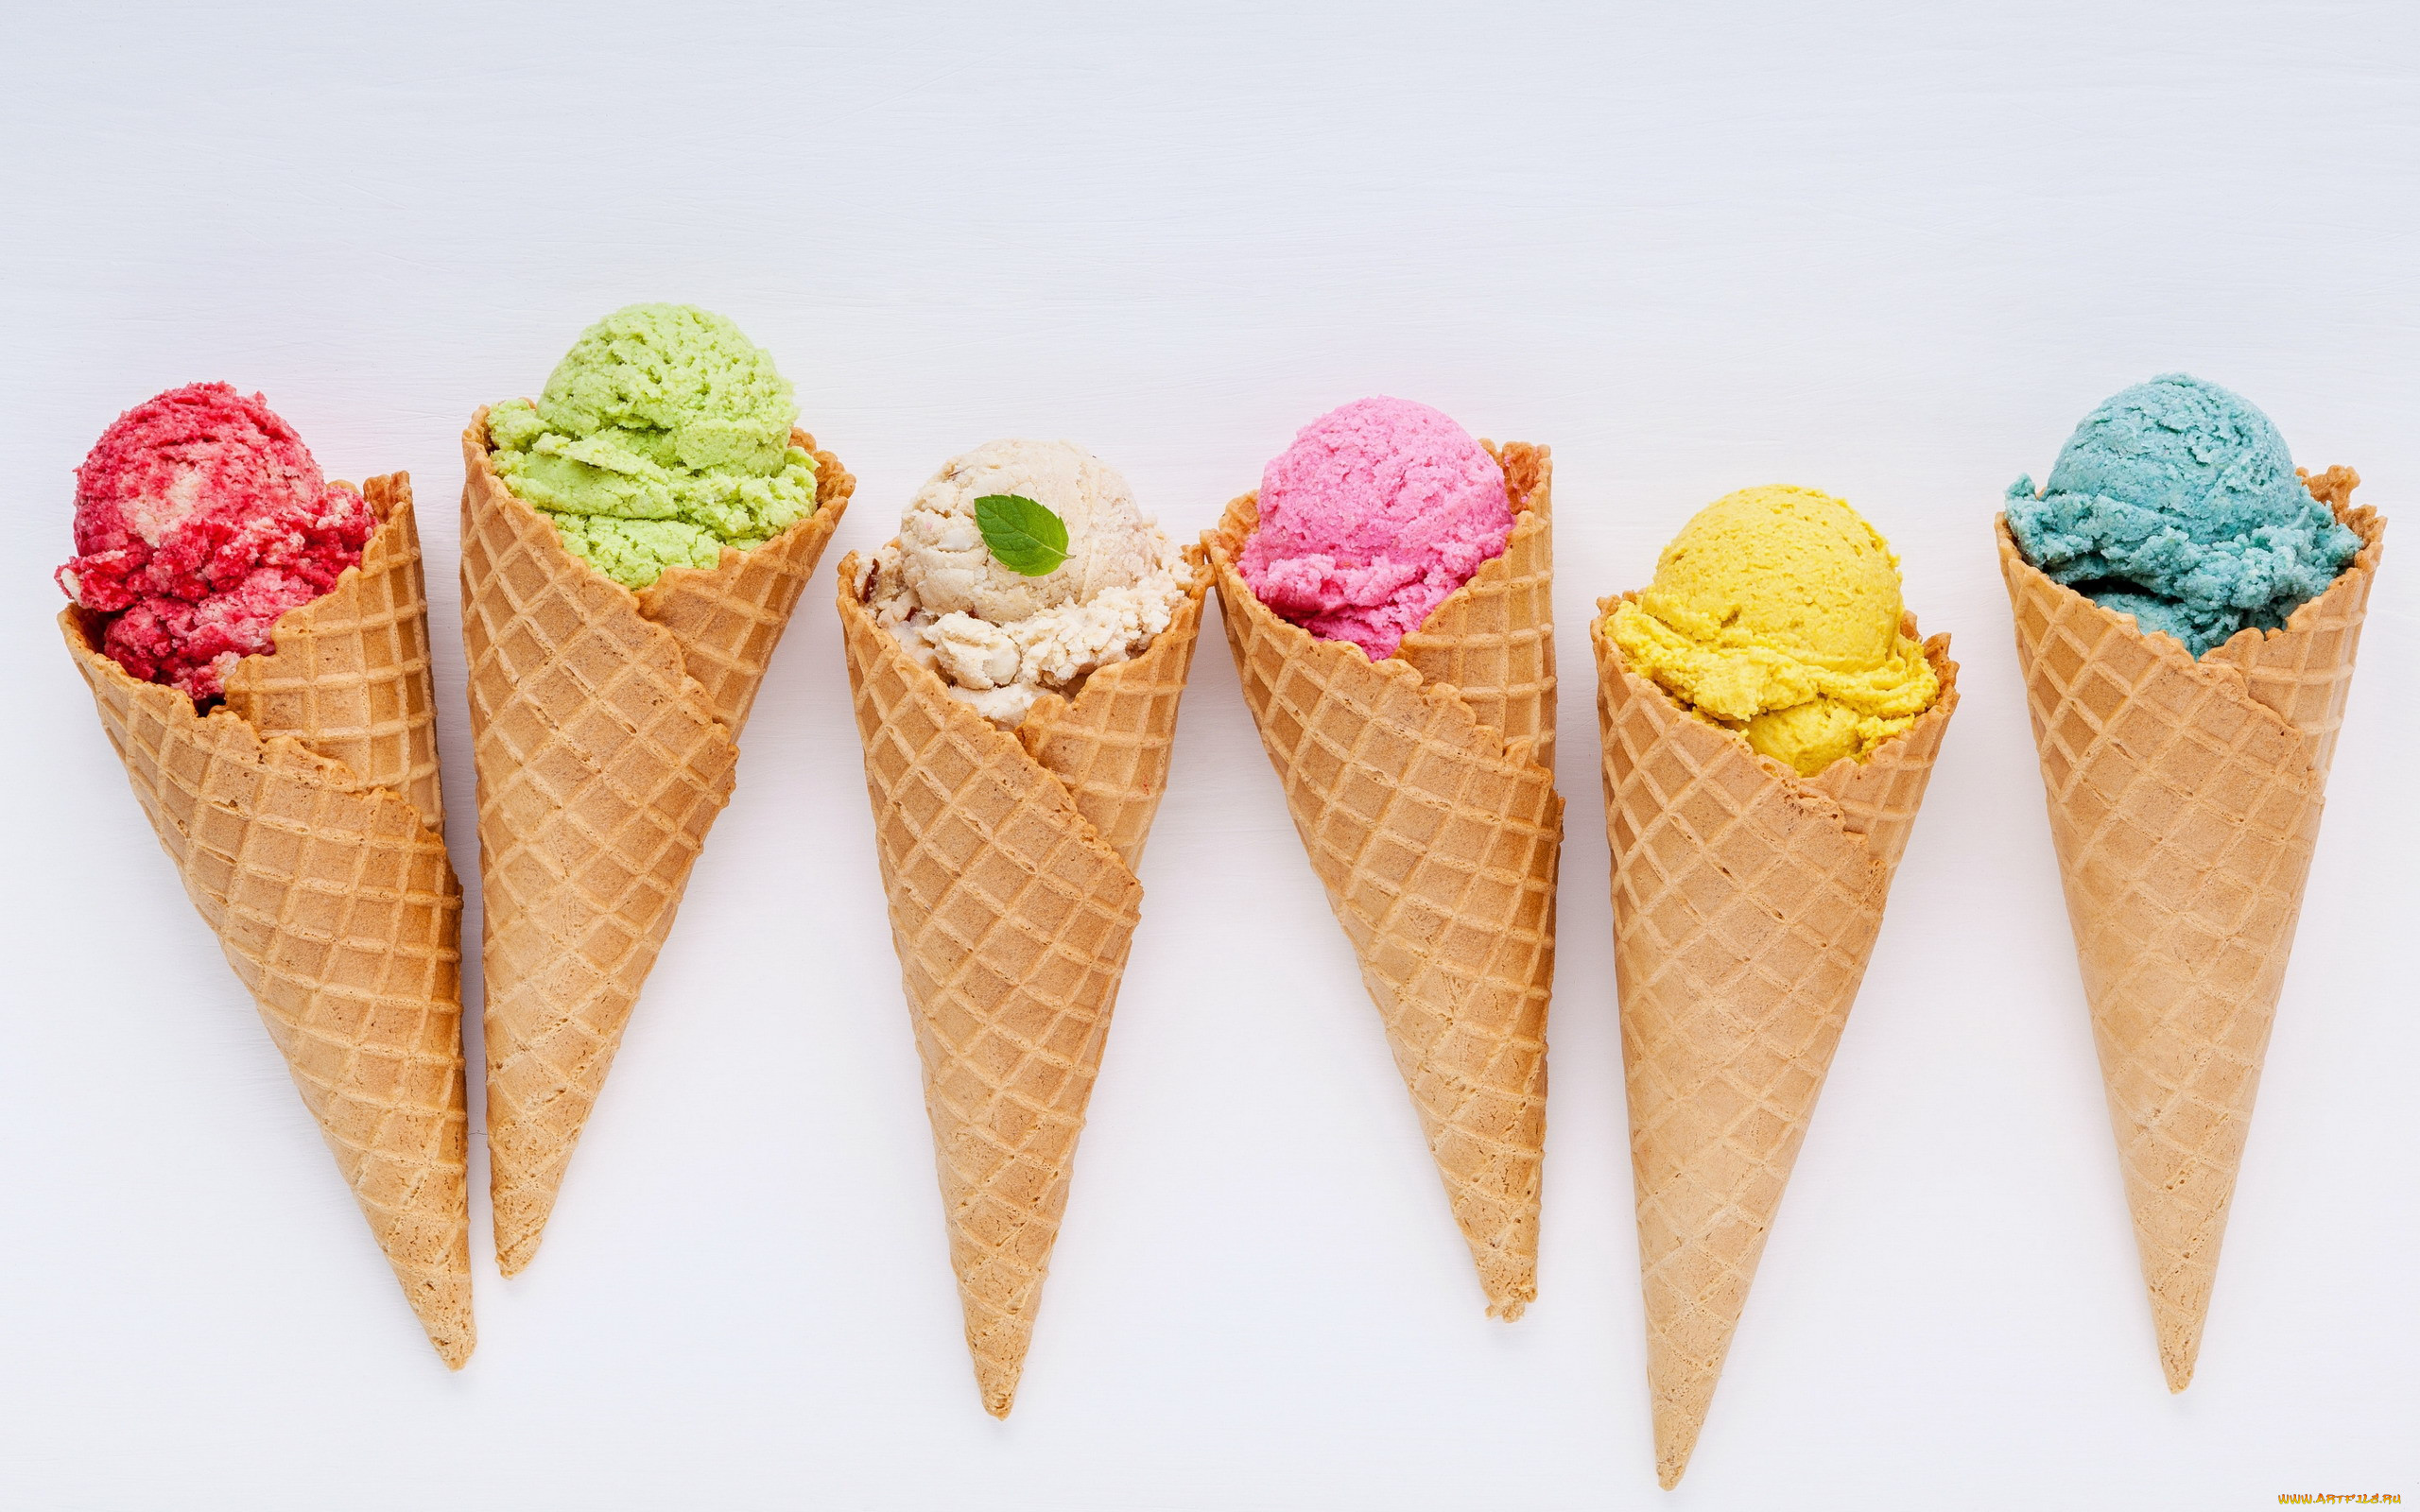 General 2560x1600 sweets ice cream food colorful simple background white